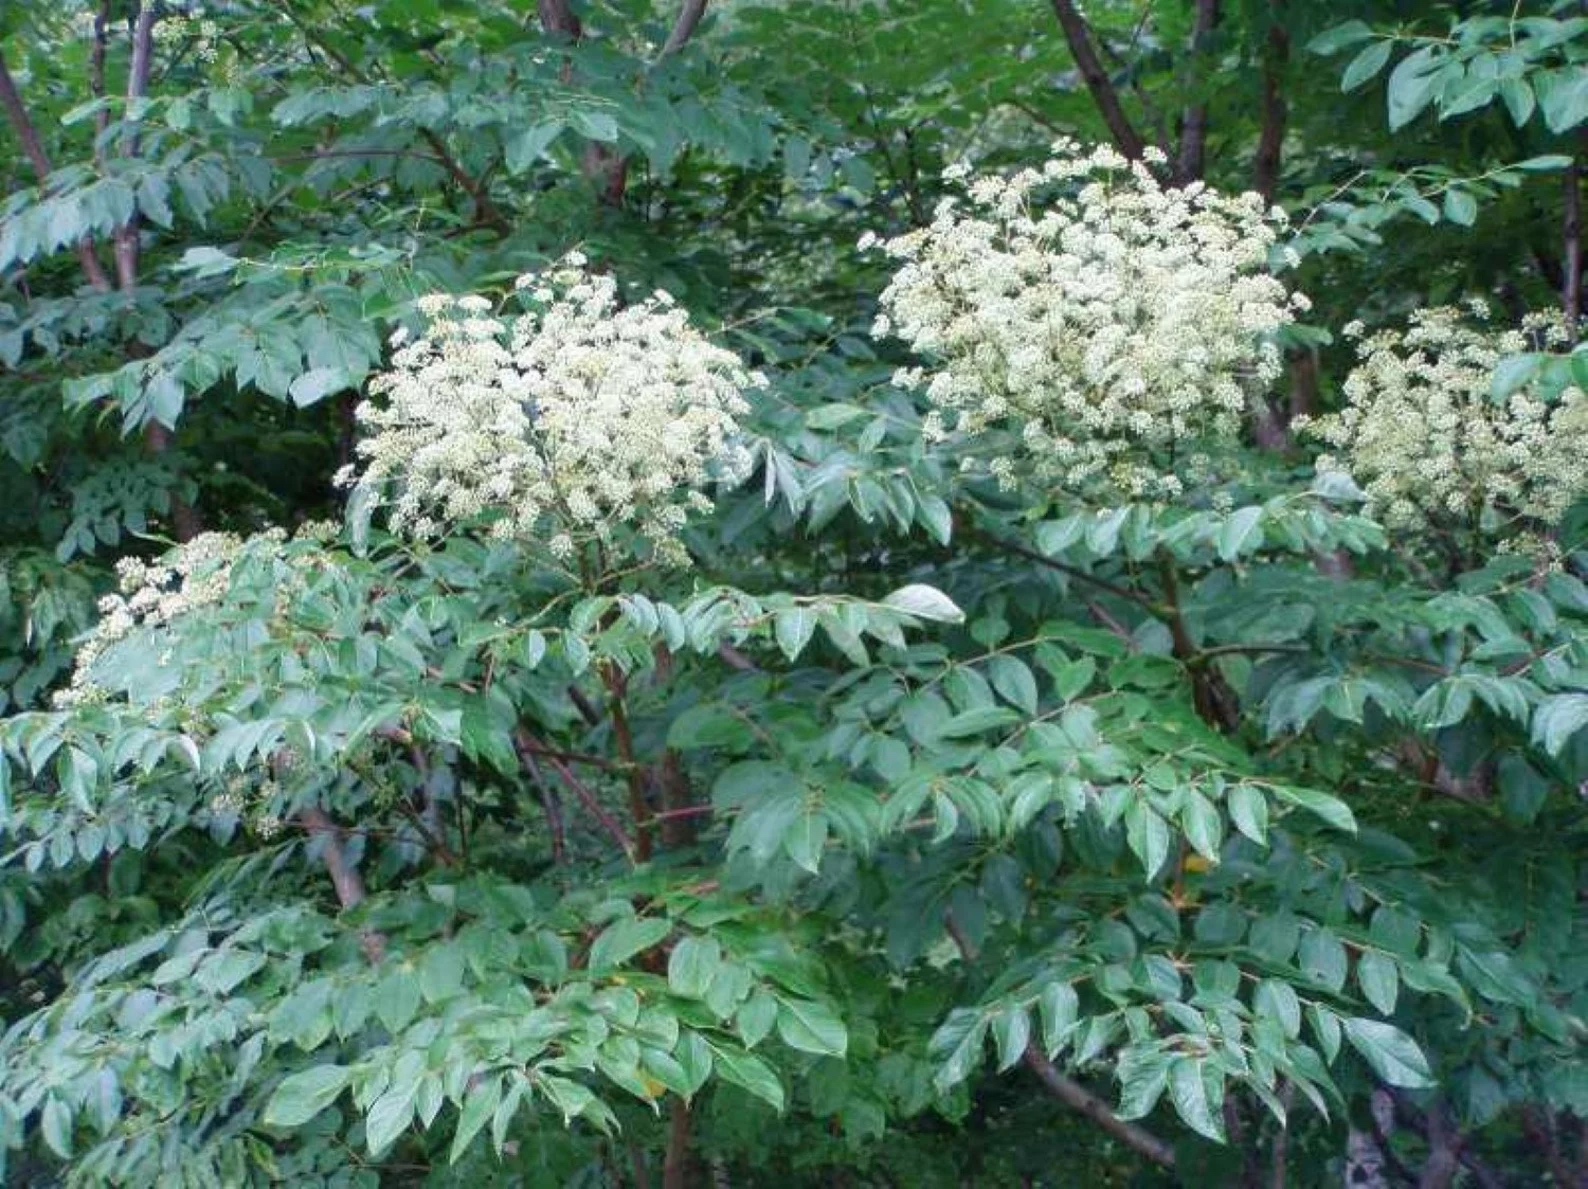 Etsy thorny plants Aralia spinosa with white flowers